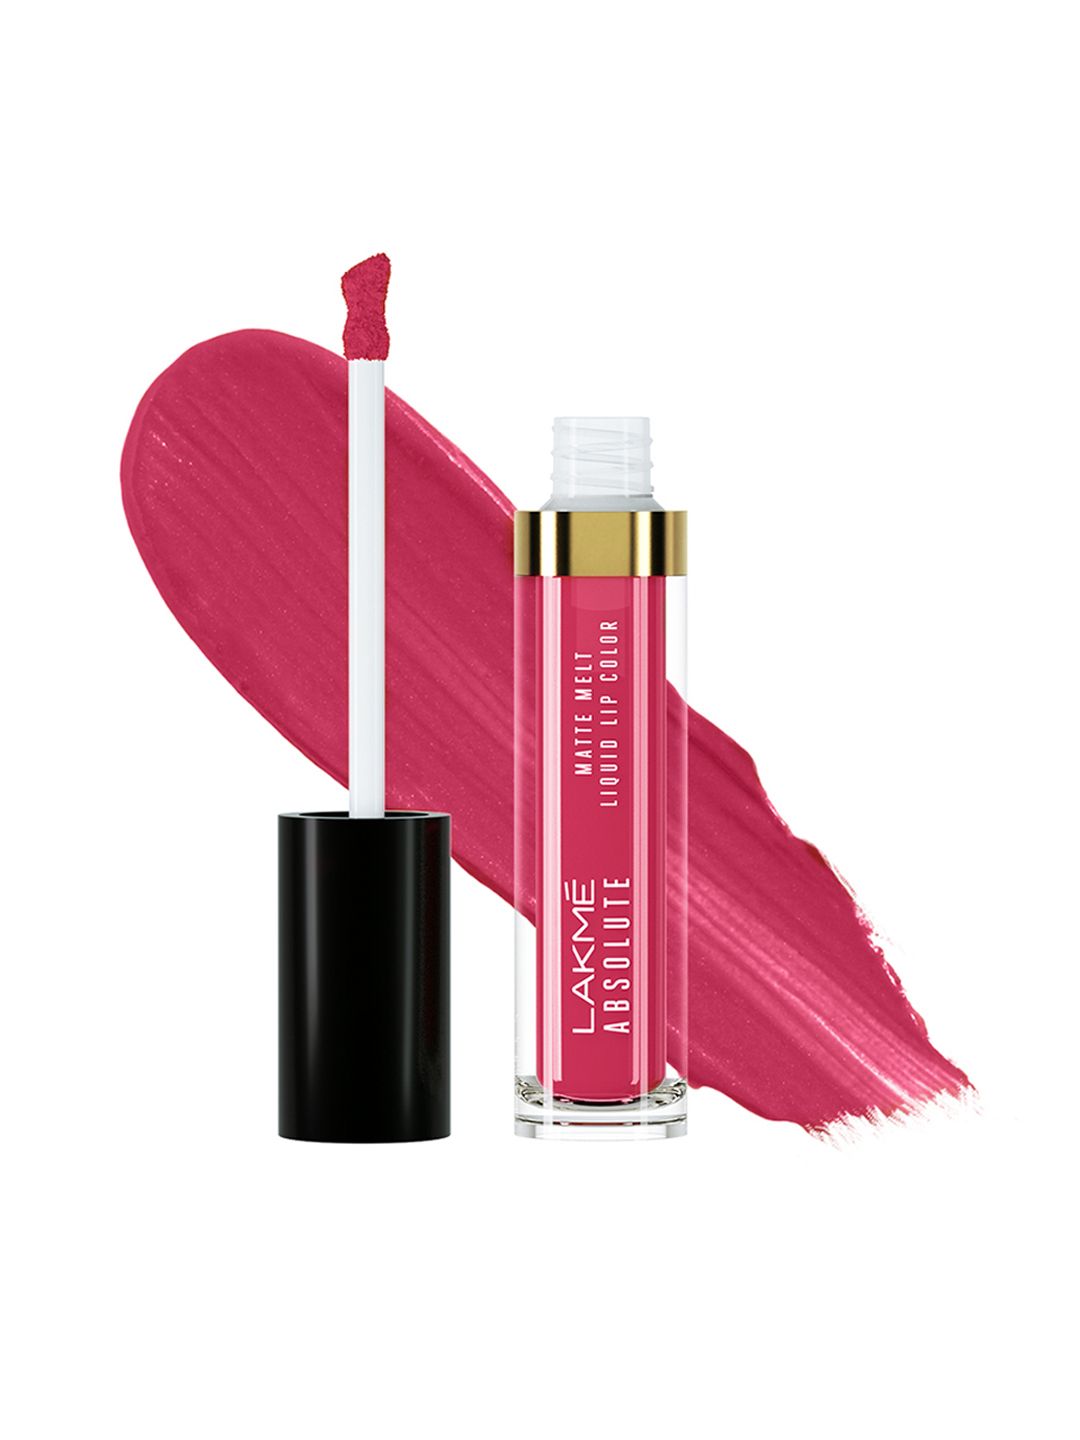 Lakme Absolute Matte Melt Liquid Lip Color - 232 Royal Rouge Price in India